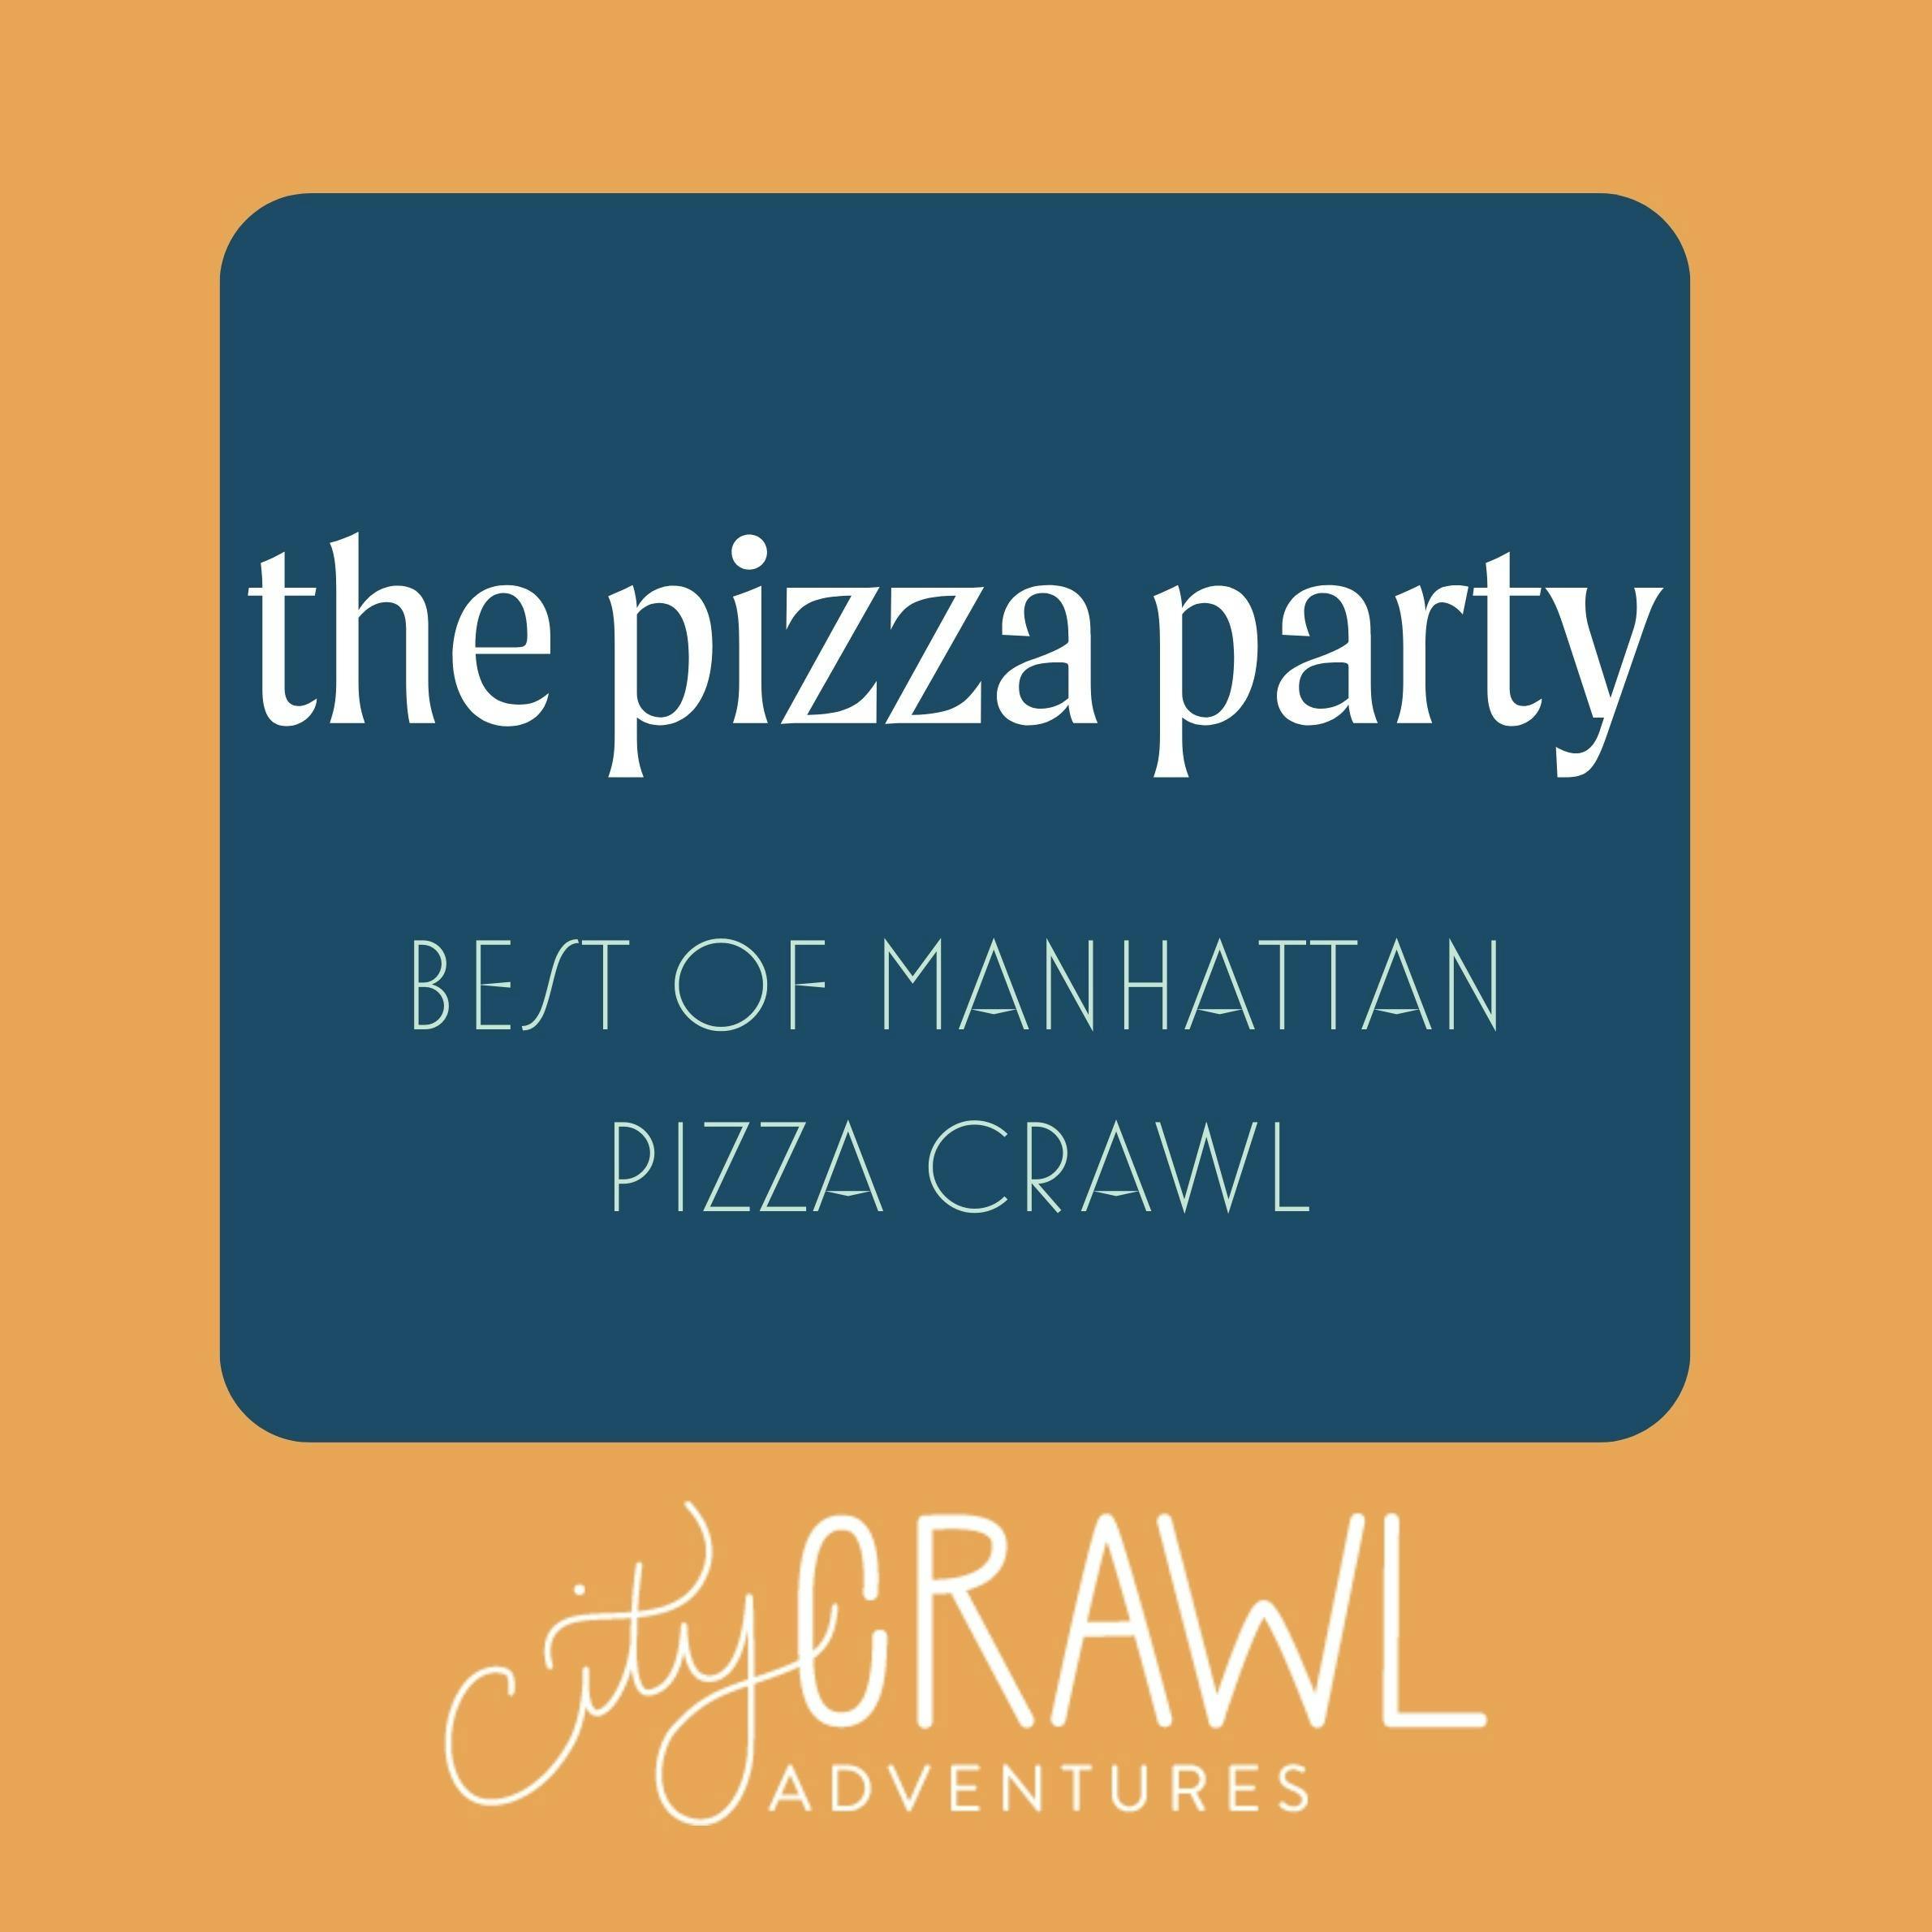 The pizza party: Best of Manhattan pizza crawl